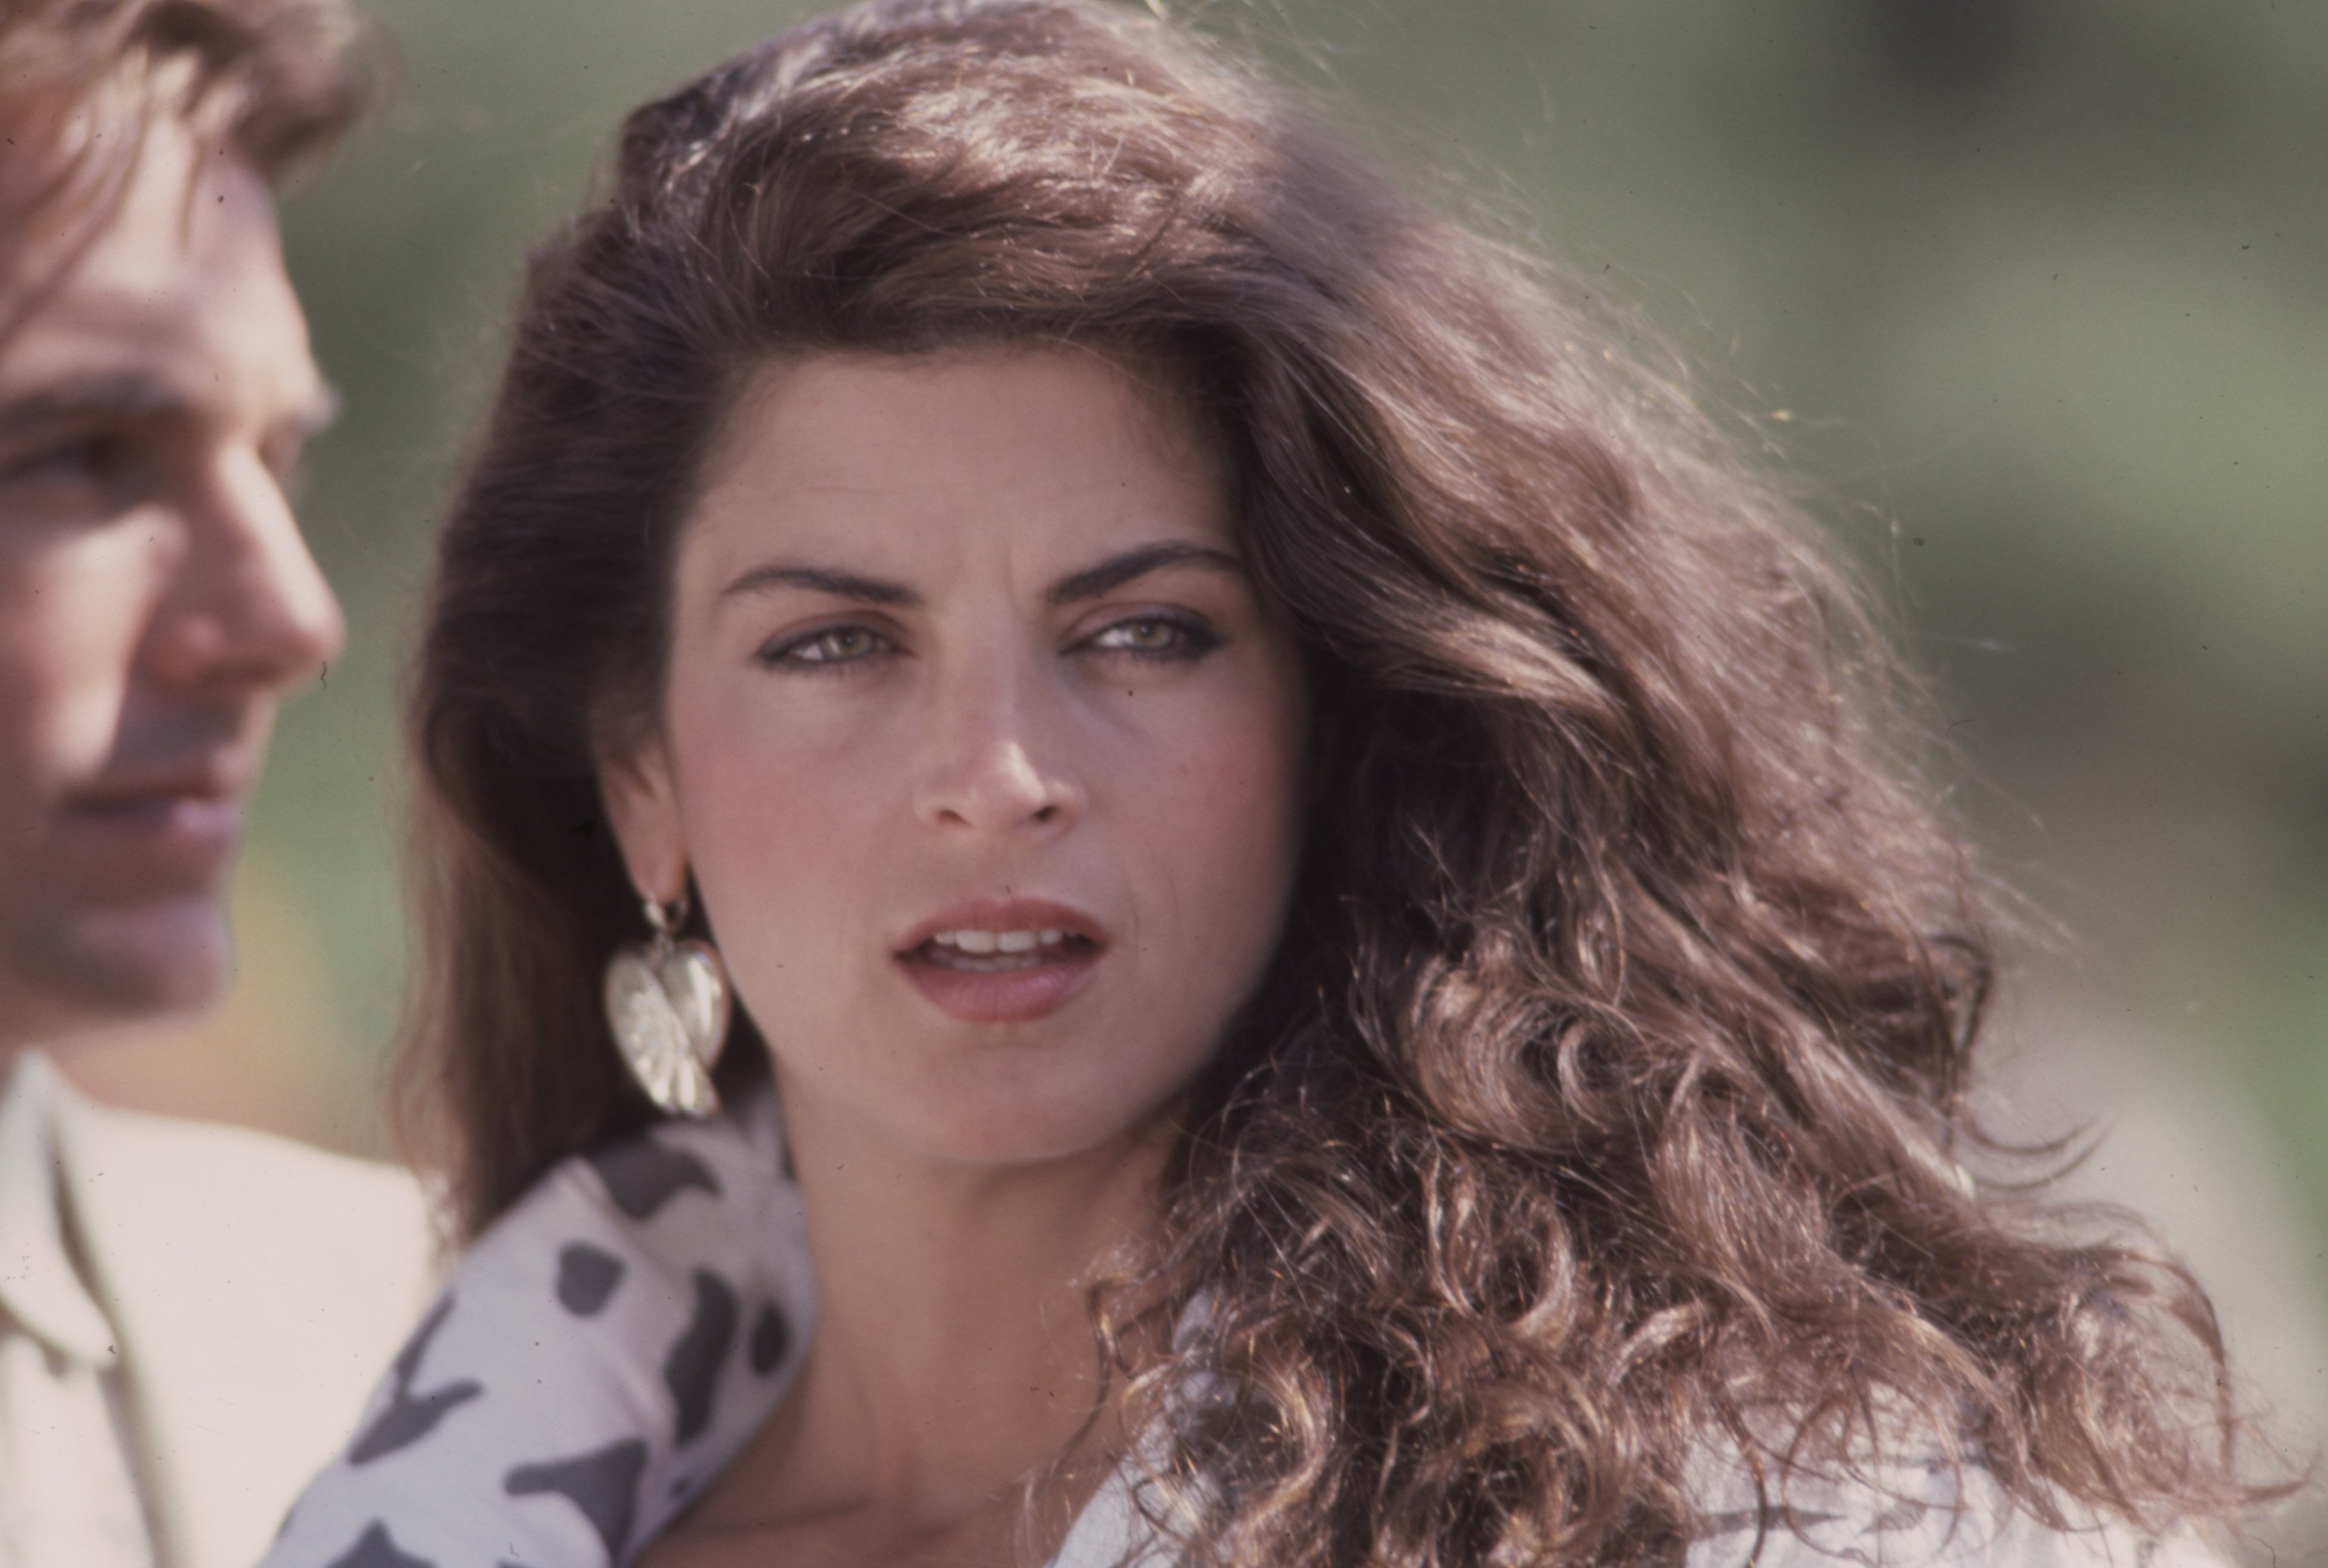 Kirstie Alley appearing in Los Angeles, California in 1986 | Source: Getty Images